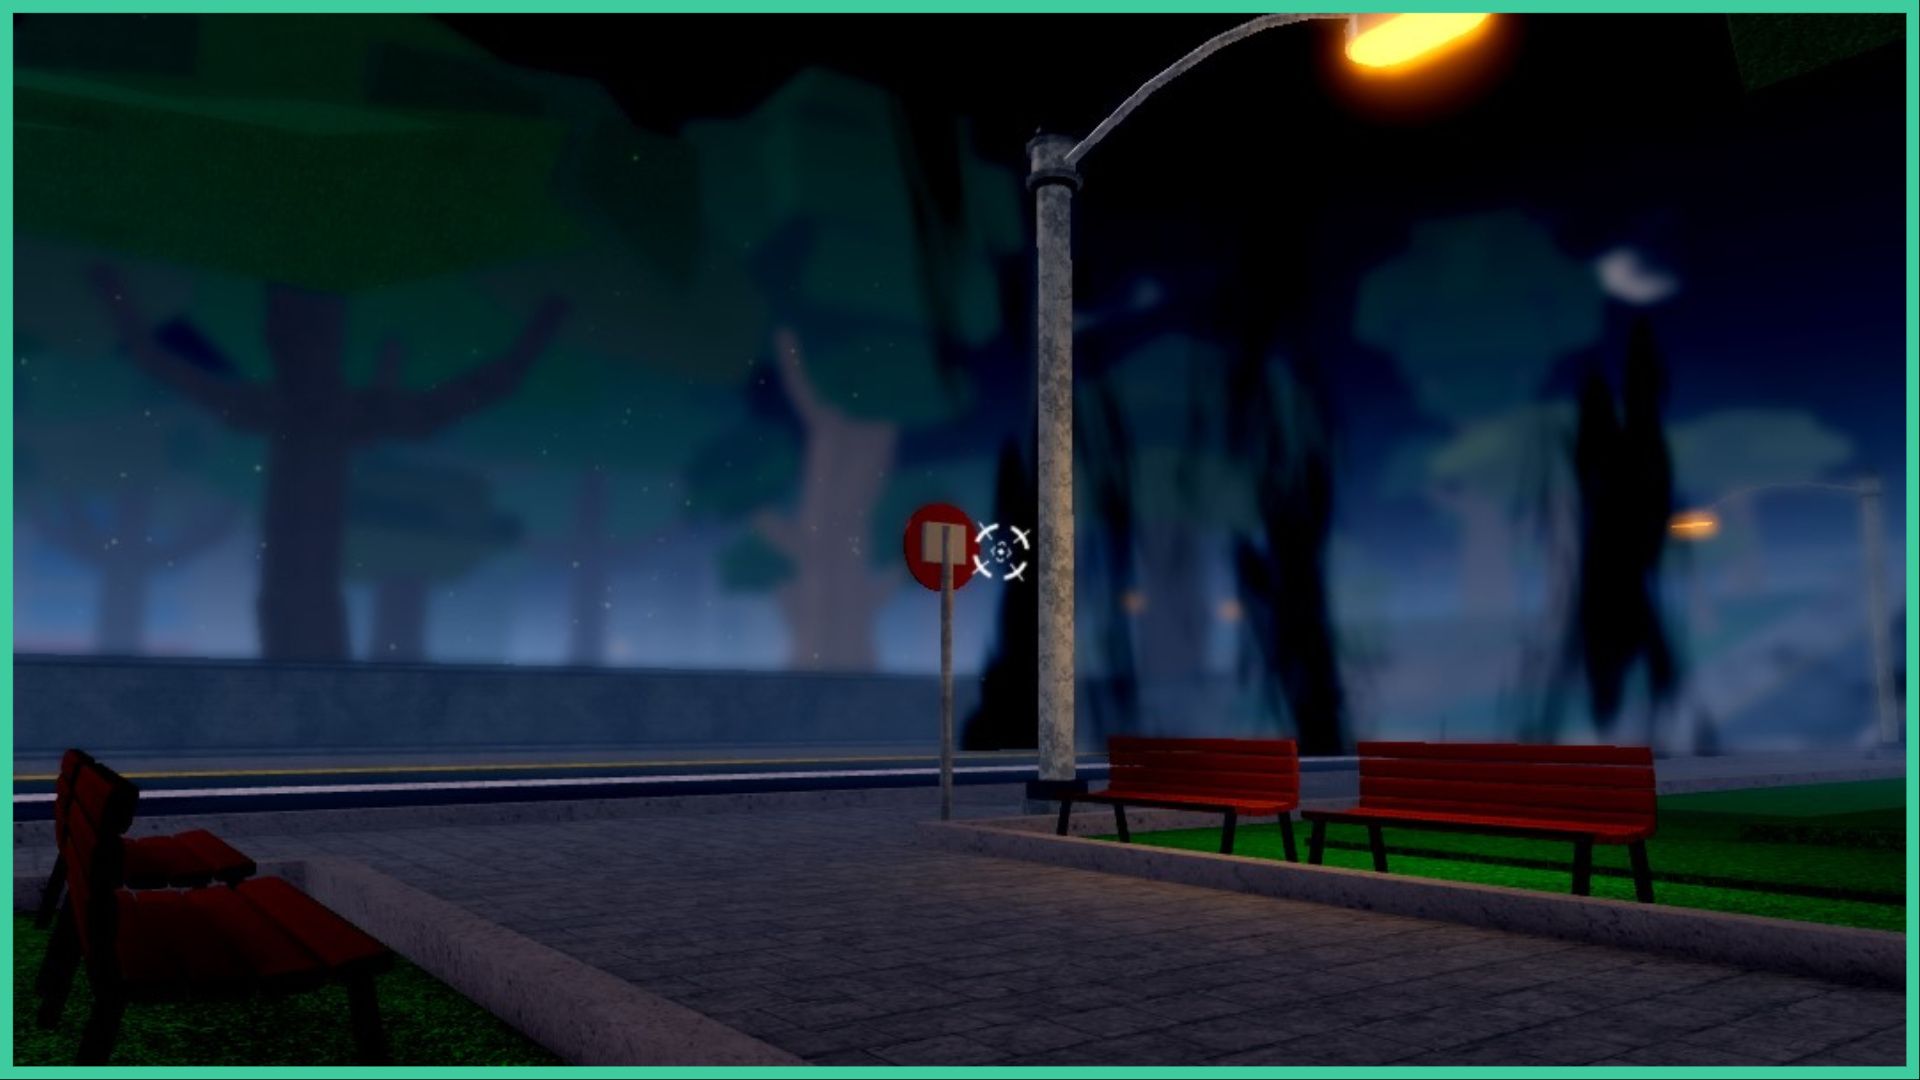 feature image for our project mugetsu hogyoku guide, there are benches on either side of the pavement on the grass, with a lamp post and stop sign next to the road, dark shadows raise up from the road to the right as speckles of dust float across the street